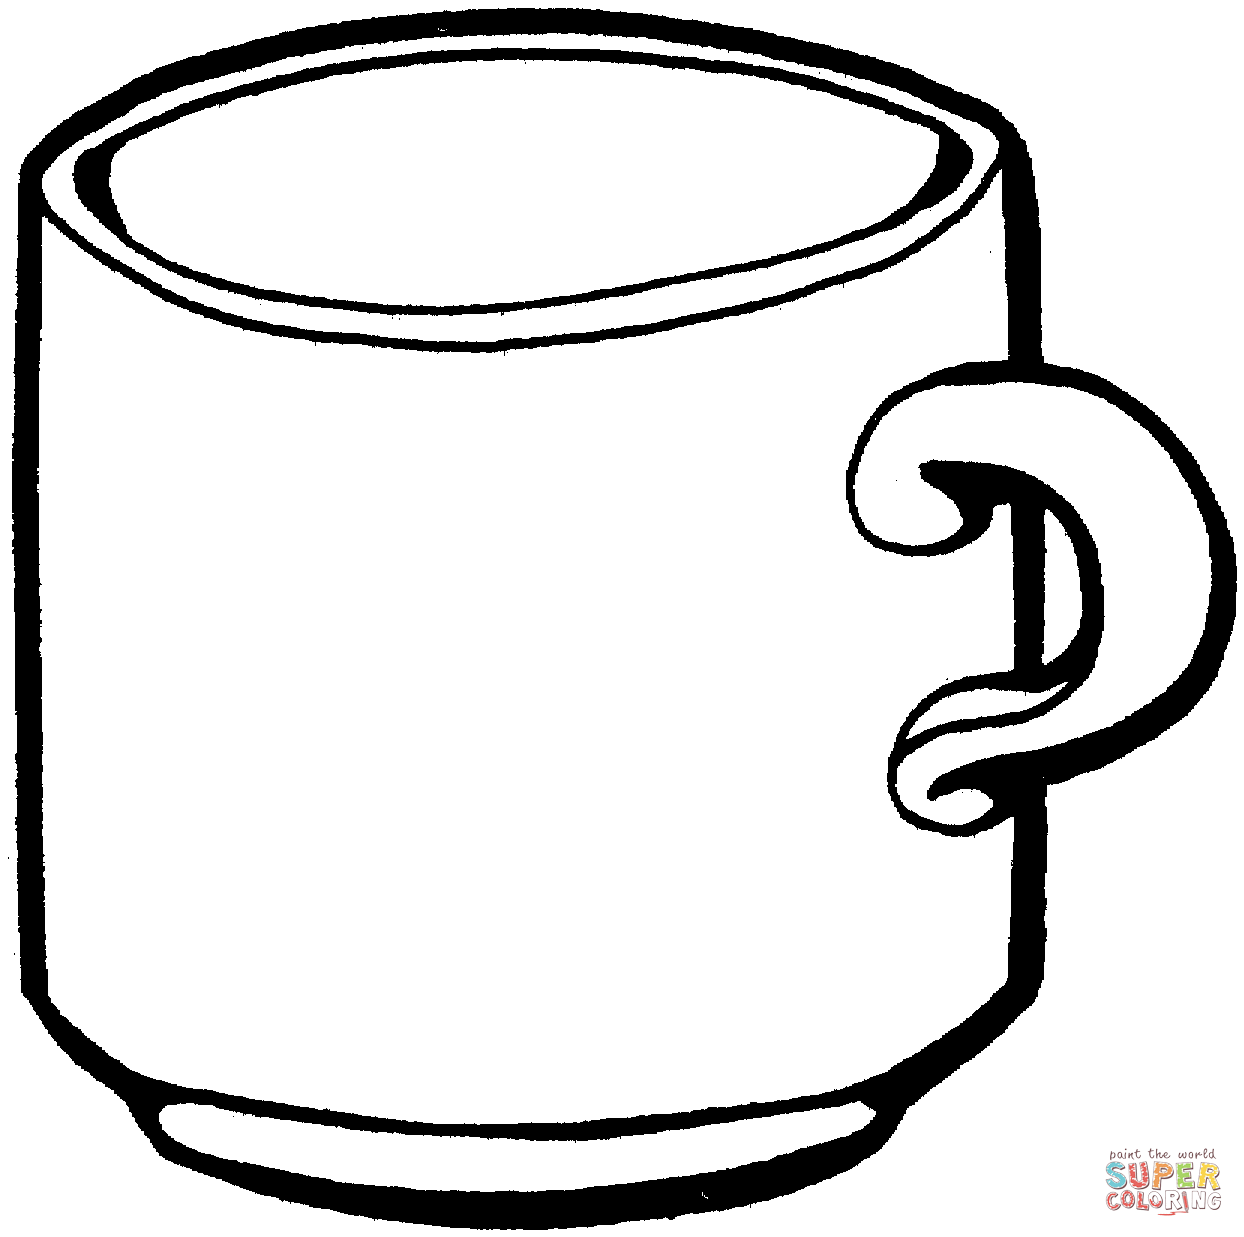 Water Bottle and Glass coloring page | Free Printable Coloring Pages